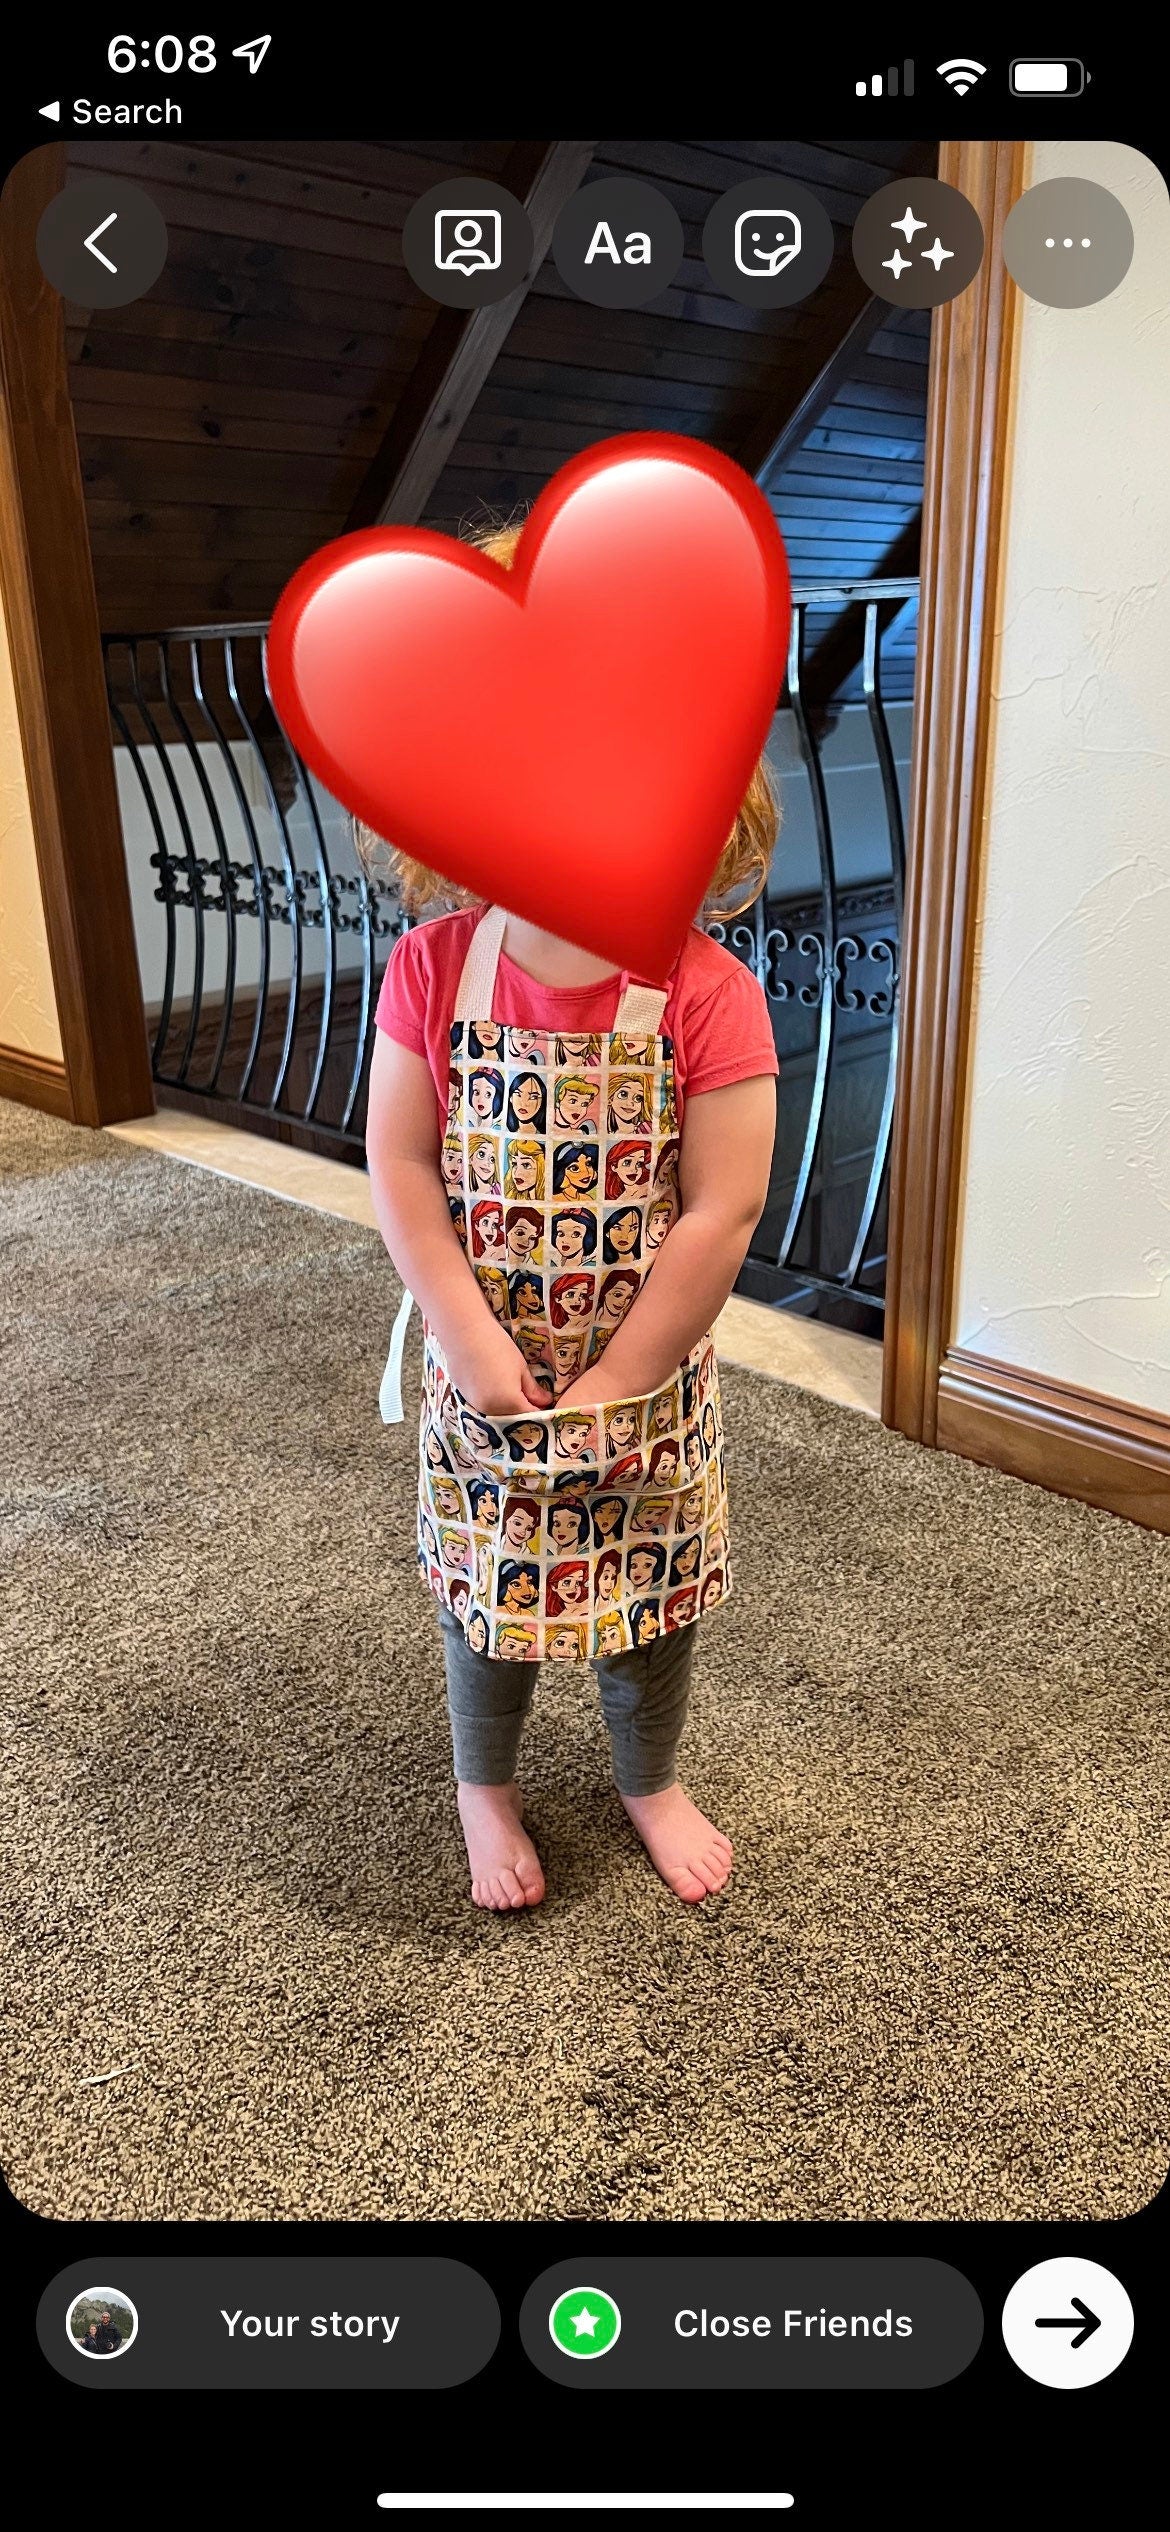 Toddler Apron - Kitchen - Cooking - Early Cooking Skills - Toddler Messes - Toddler Accessories - Bread - Baking - Loaf - Food - Small Apron